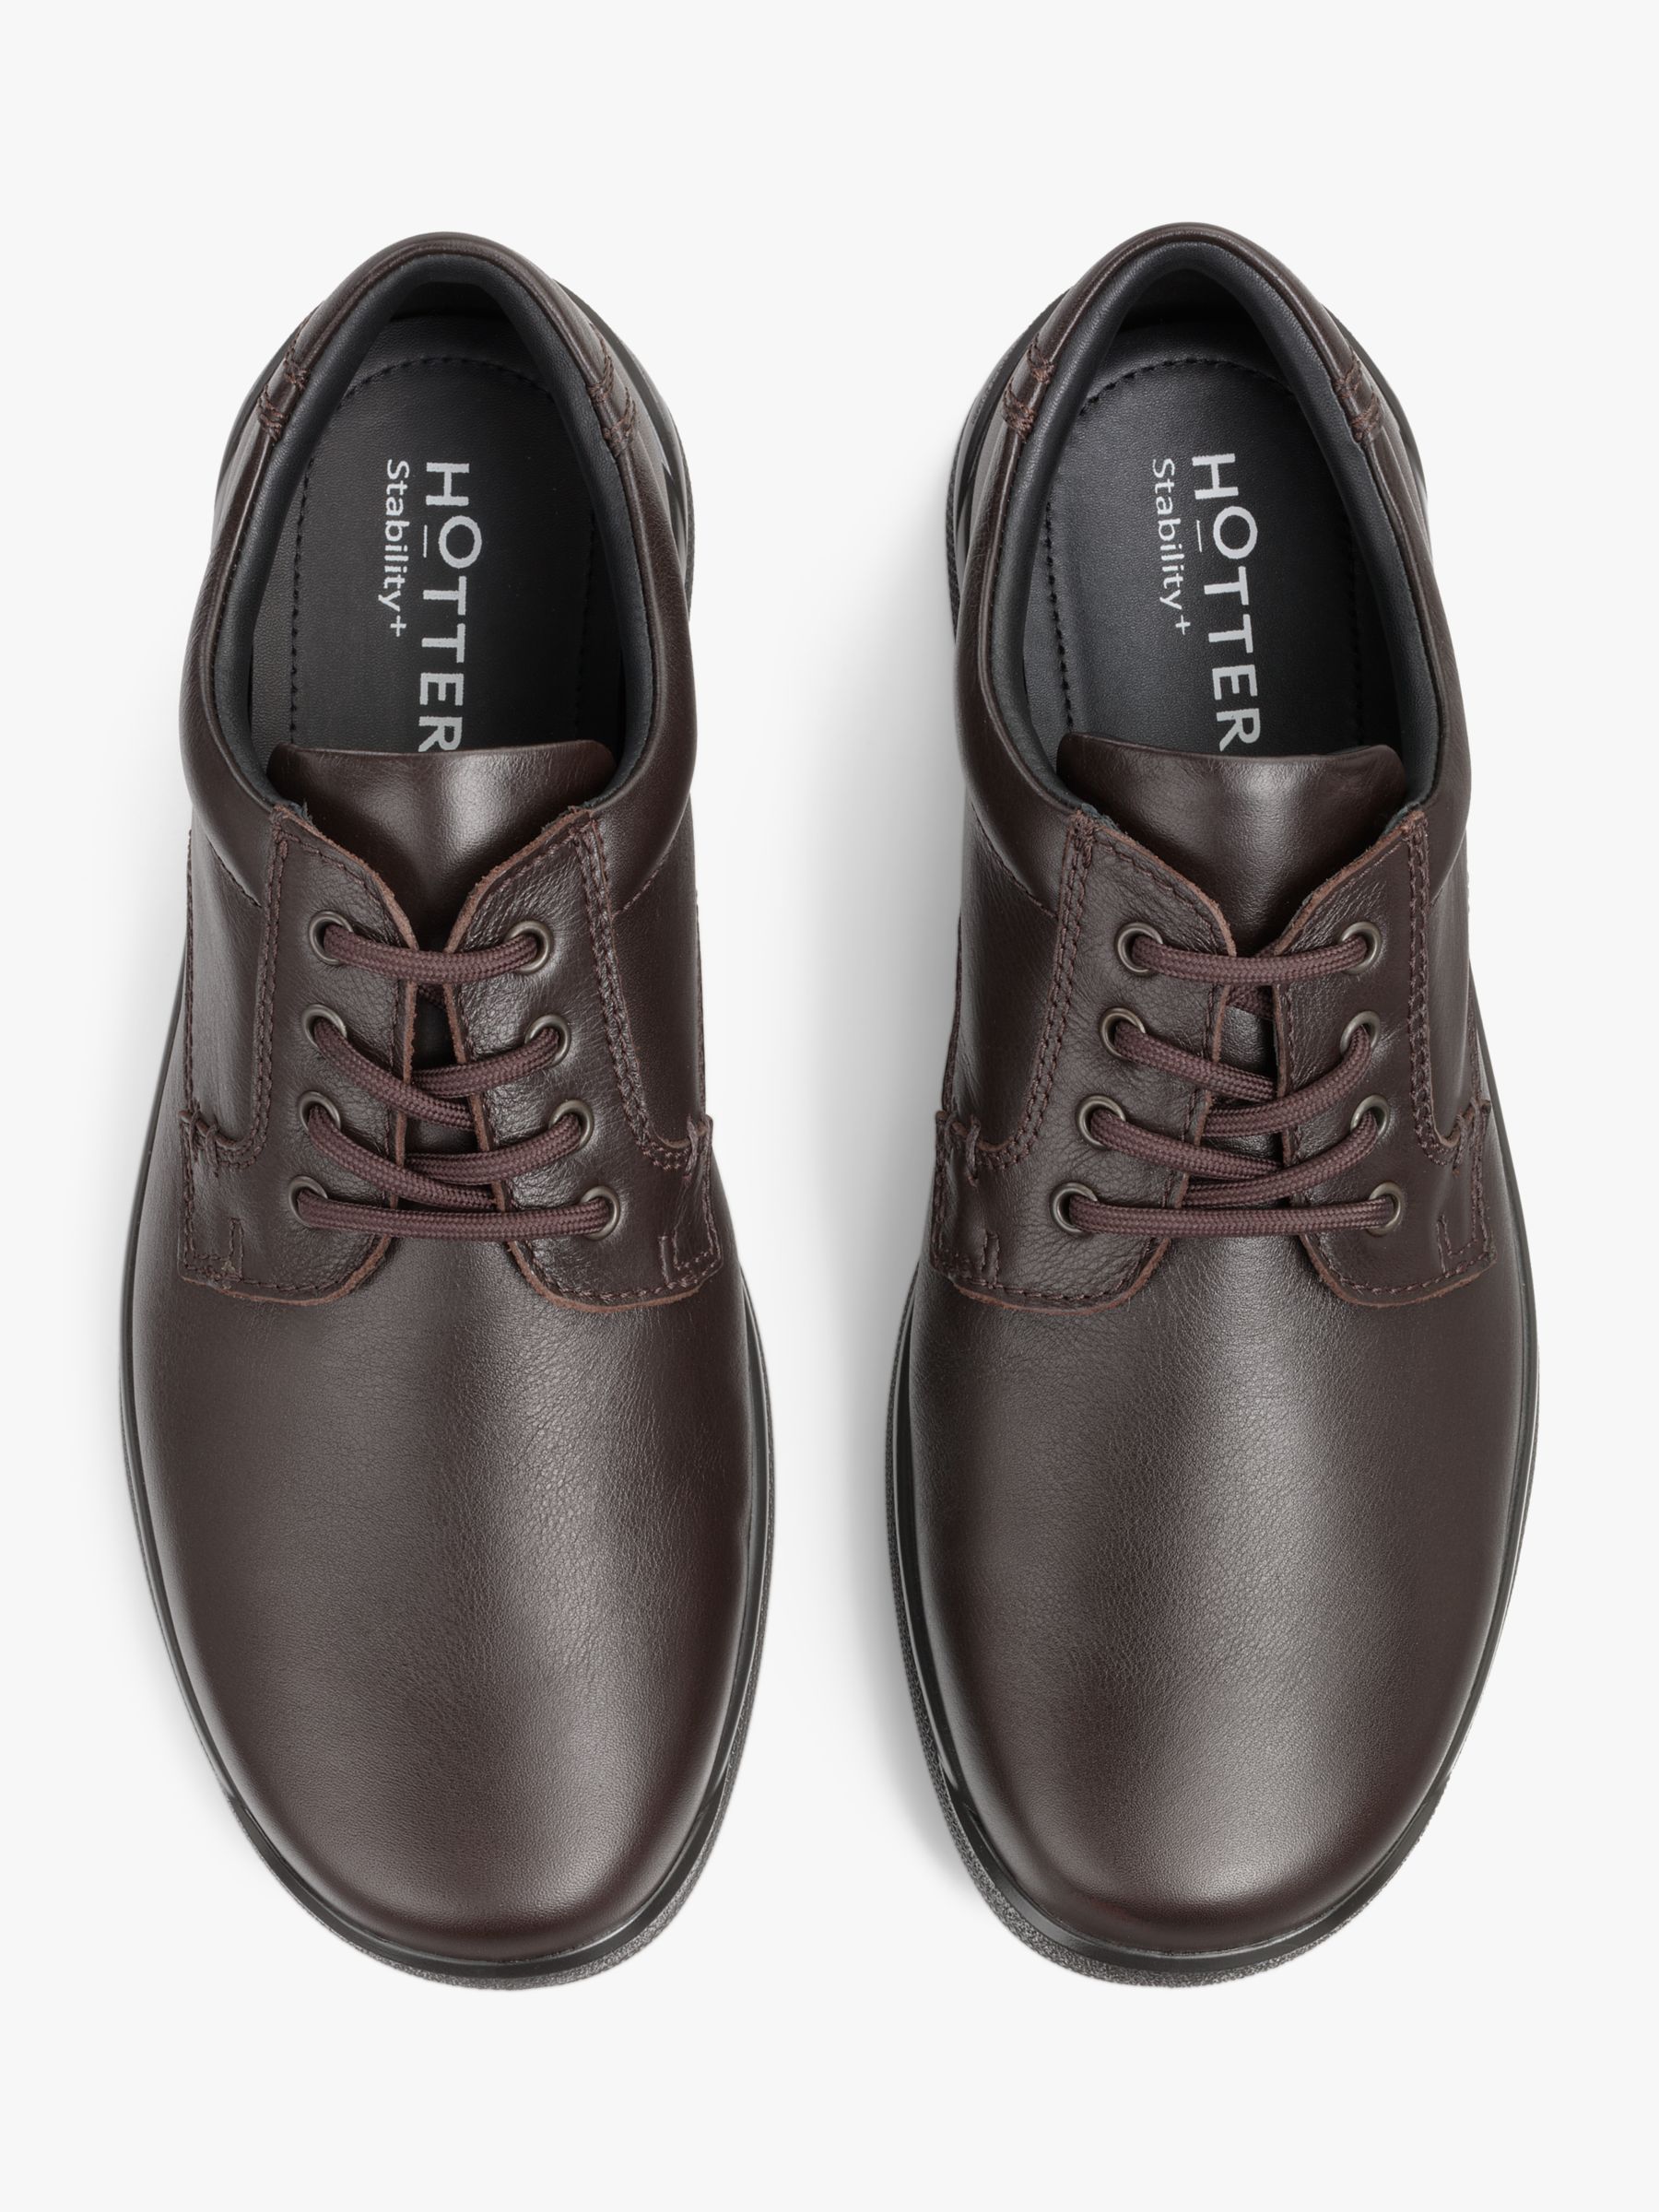 Buy Hotter Burton II Classic Leather Lace-Up Derby Shoes Online at johnlewis.com